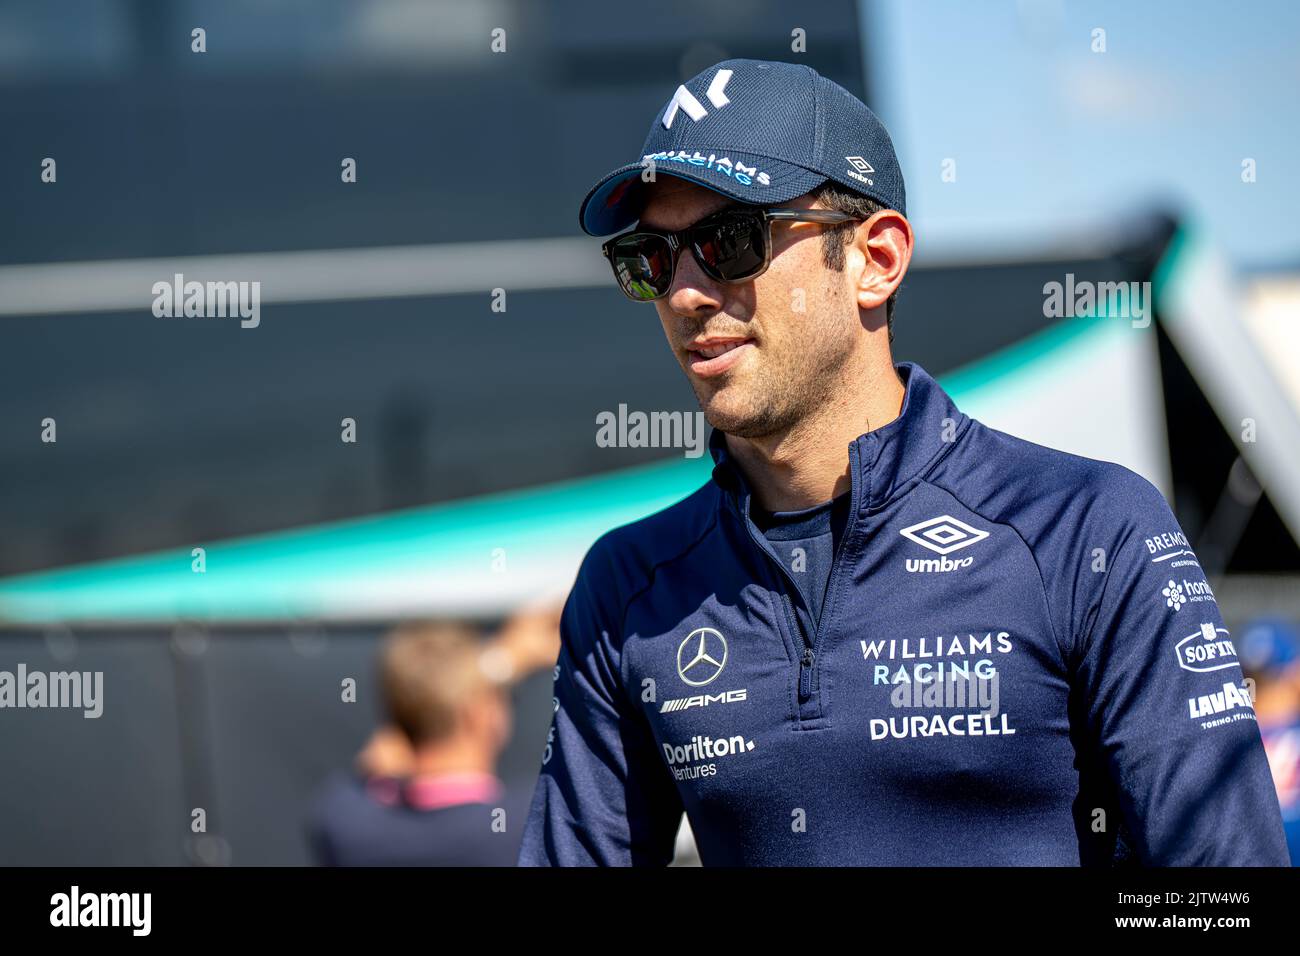 Zandvoort, Netherlands, 01st Sep 2022, Nicholas Latifi, from Canada competes for Williams Racing. The build up, round 15 of the 2022 Formula 1 championship. Credit: Michael Potts/Alamy Live News Stock Photo